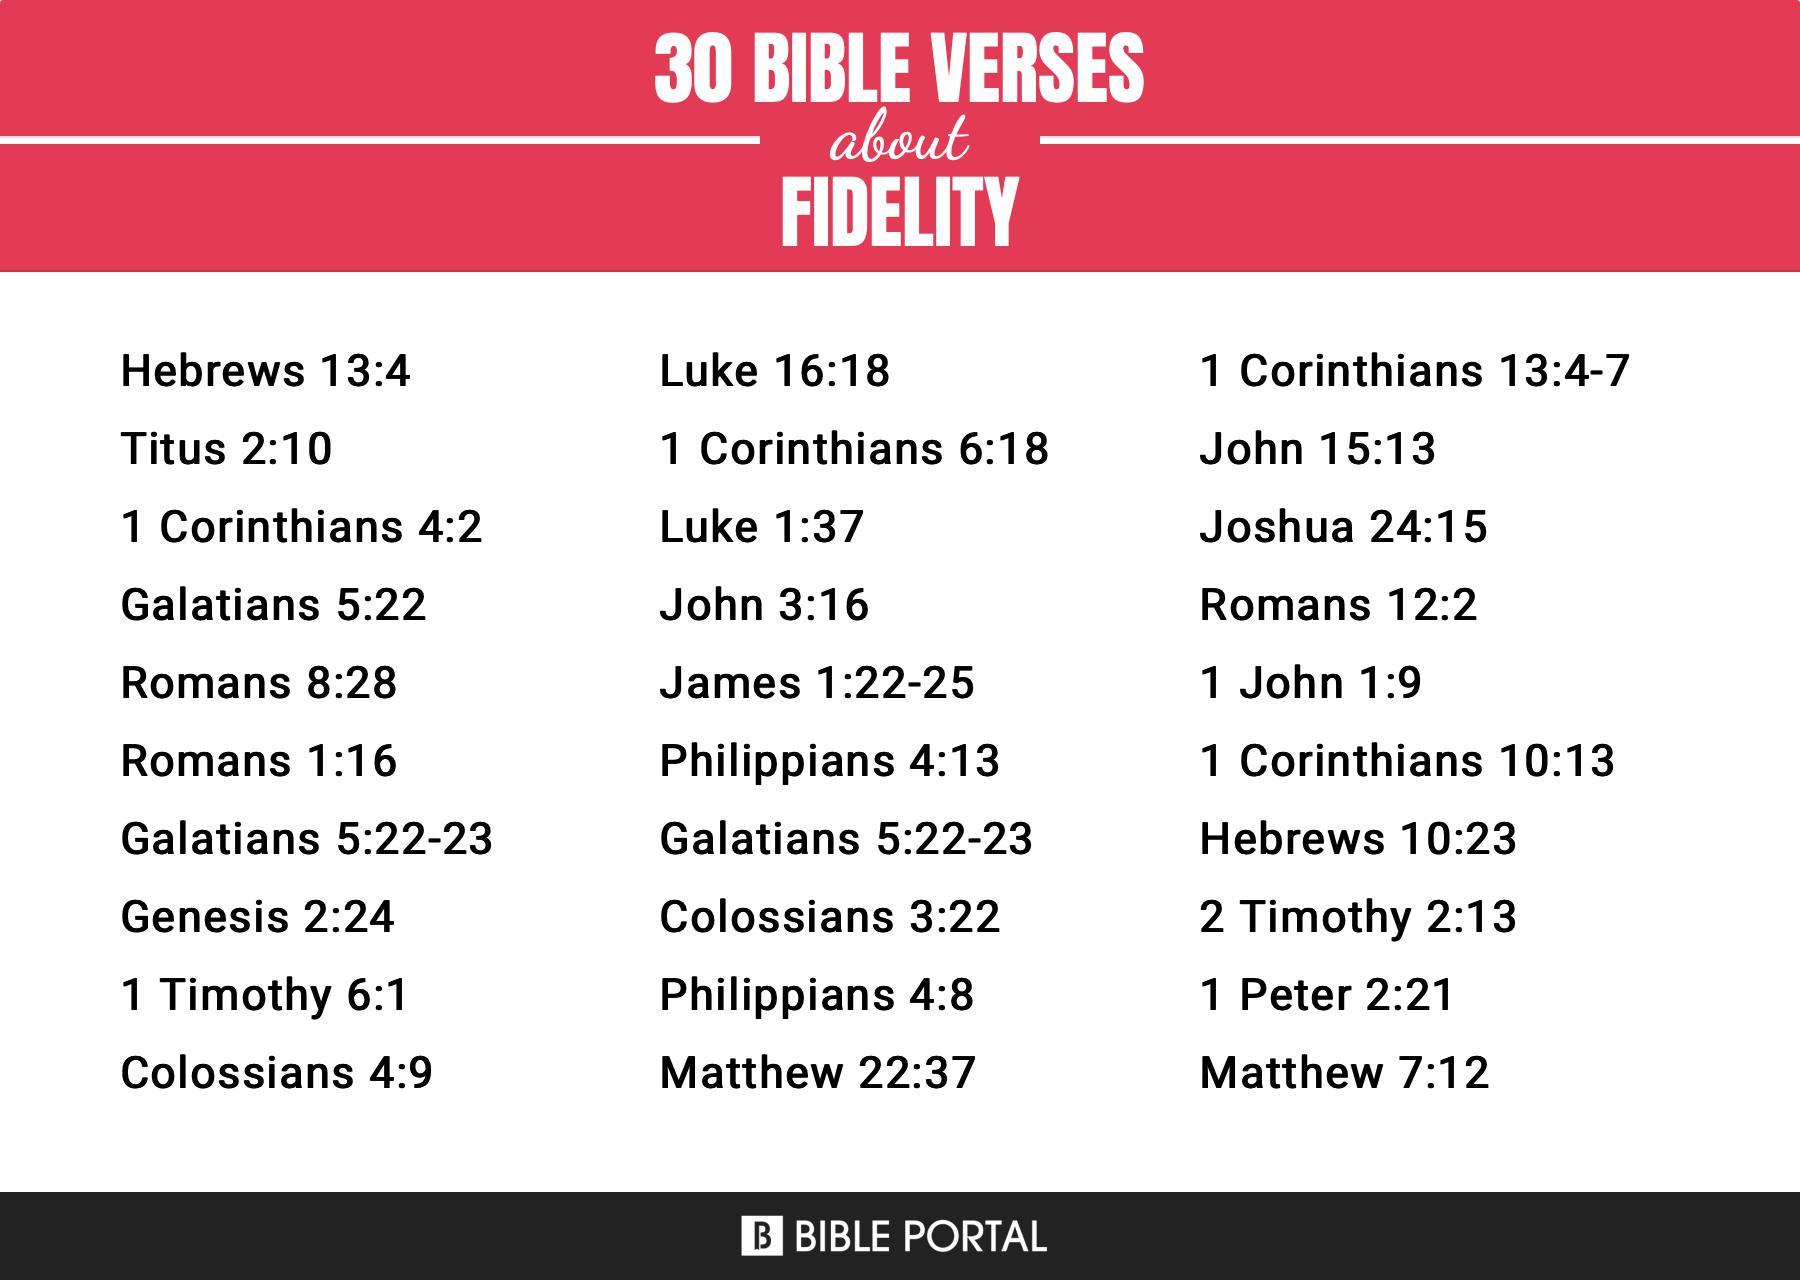 What Does the Bible Say about Fidelity?